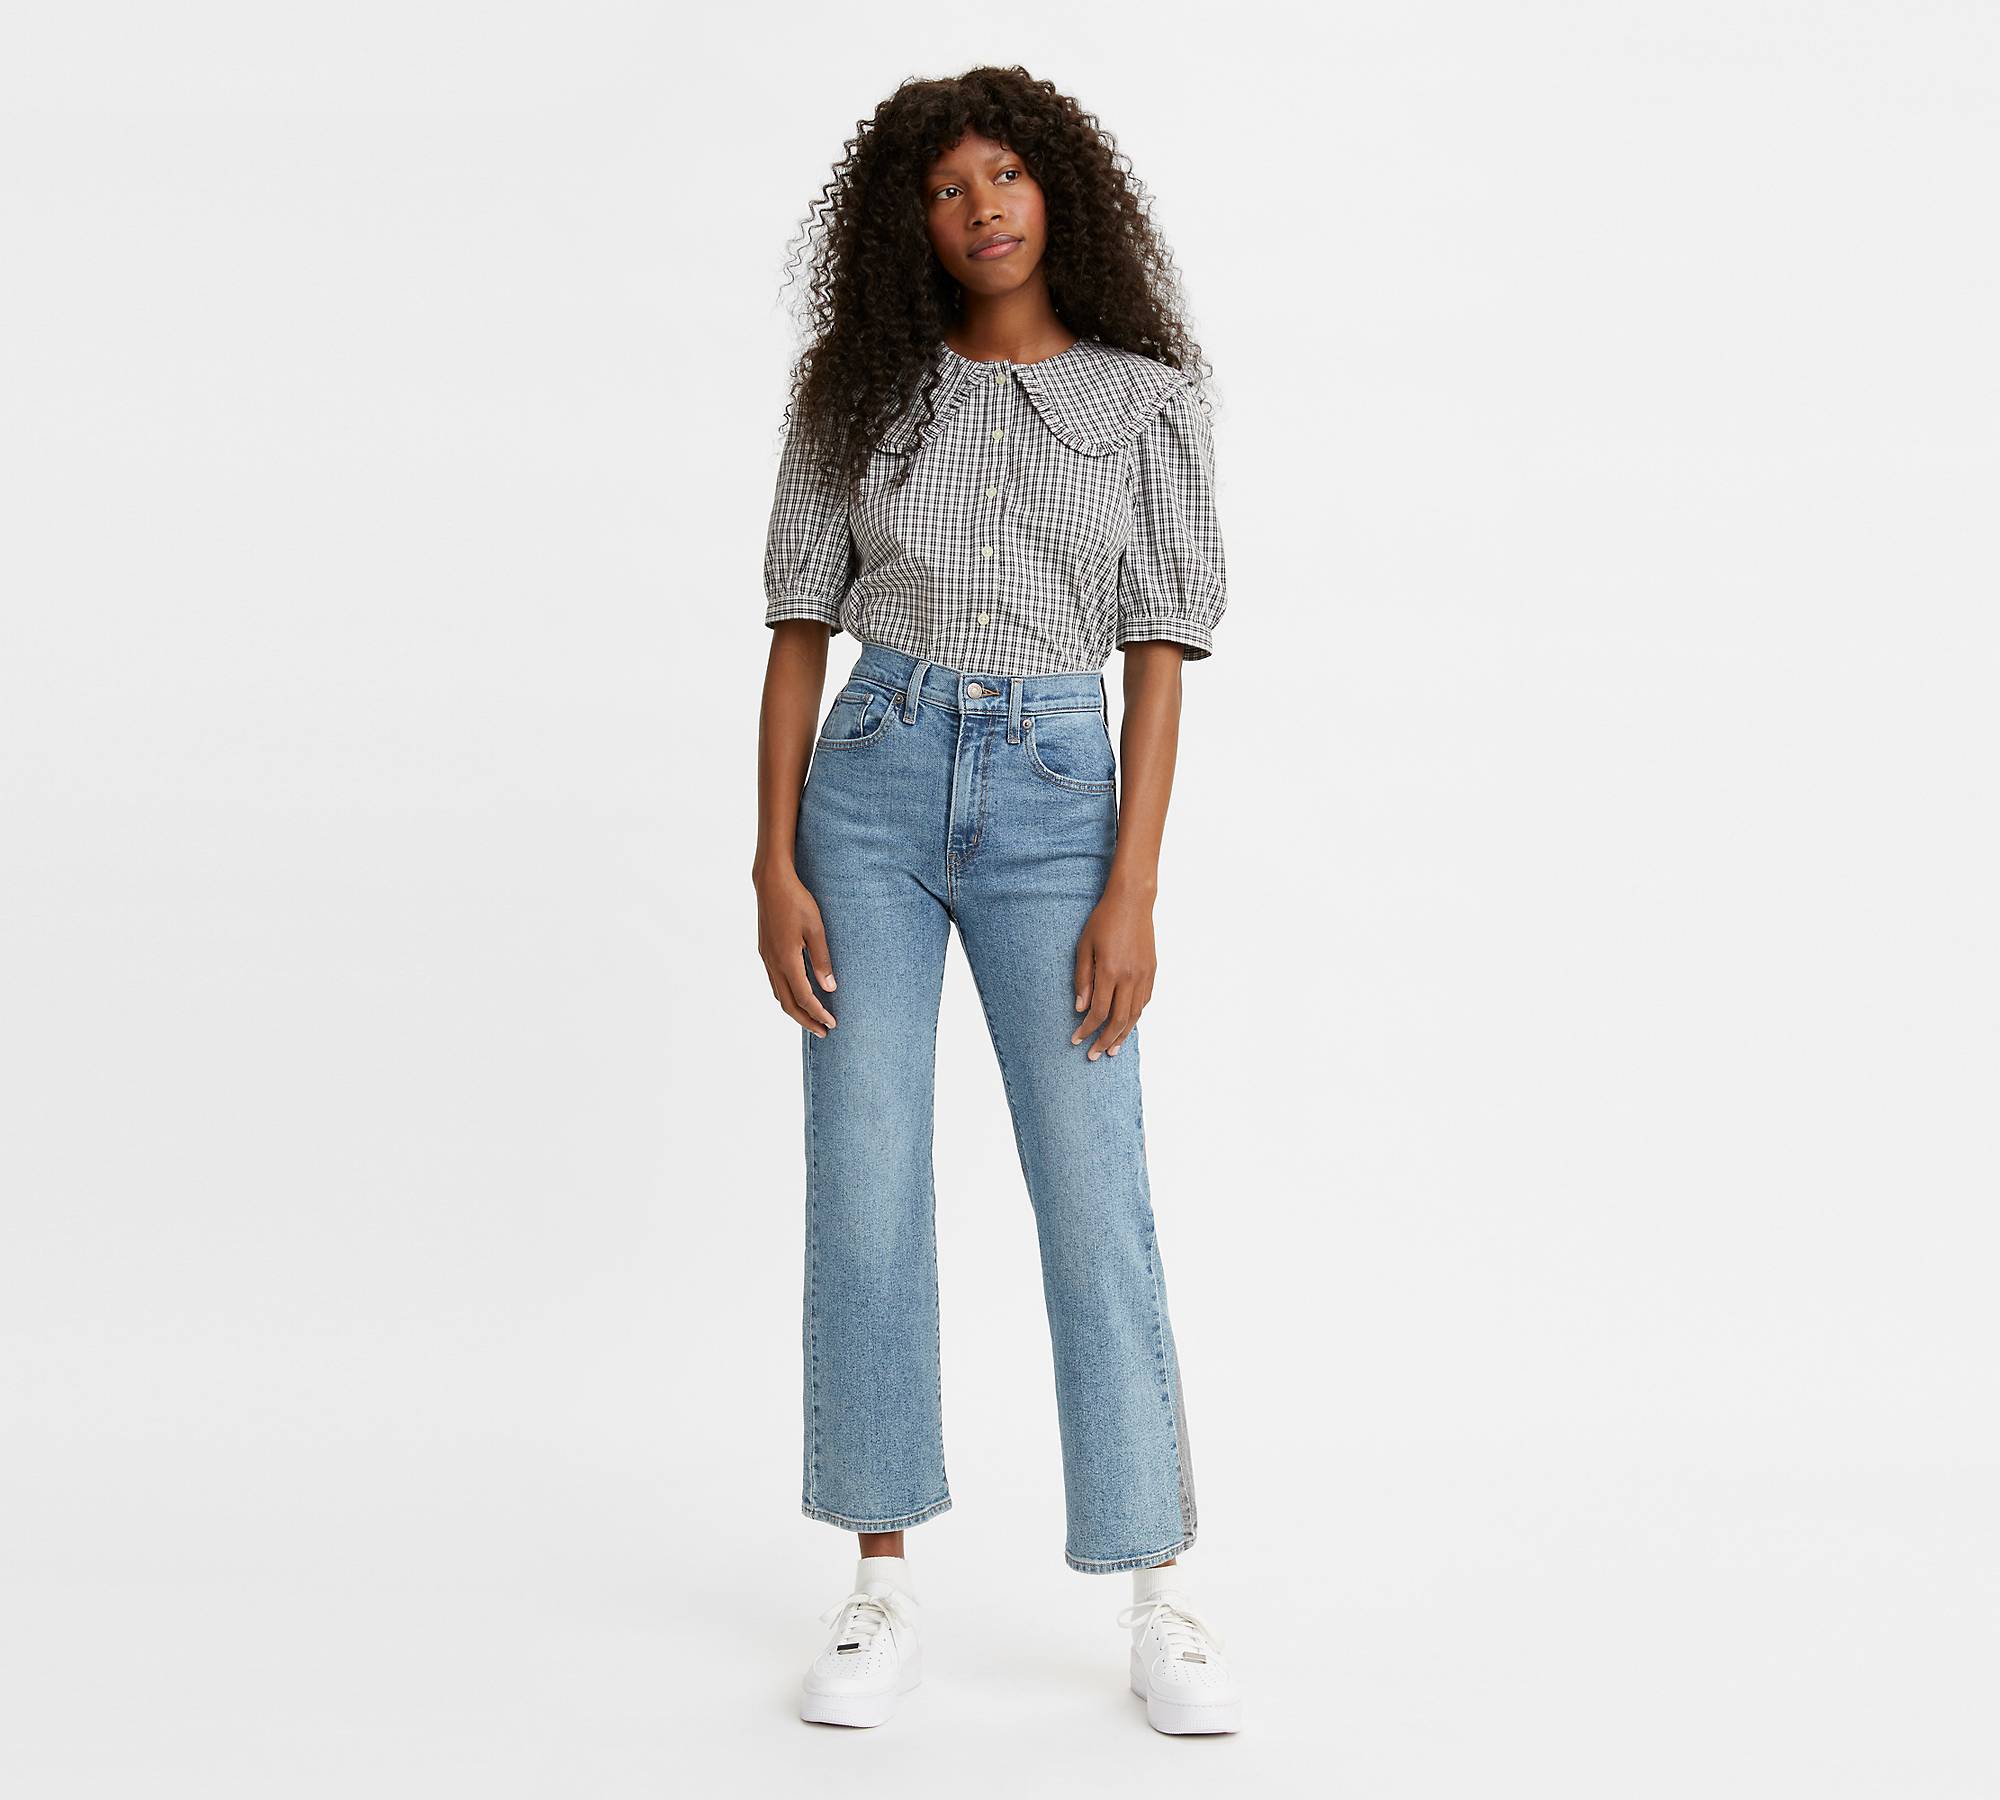 High Rise Cropped Flare Women's Jeans - Medium Wash